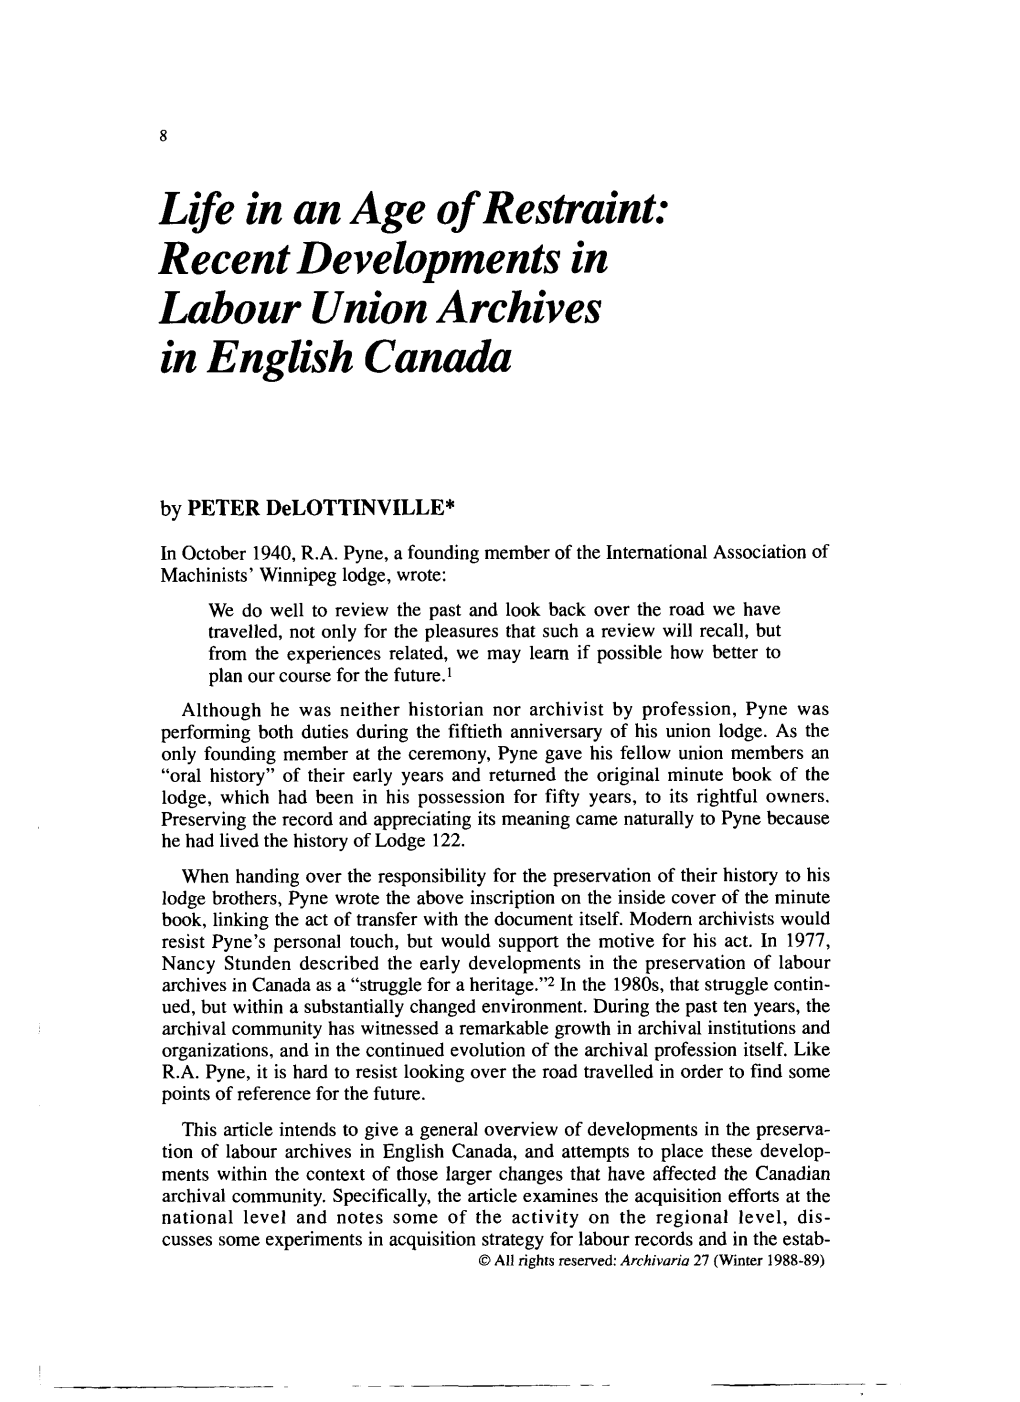 Life in an Age of Restraint: Recent Developments in Labour Union Archives in English Canada